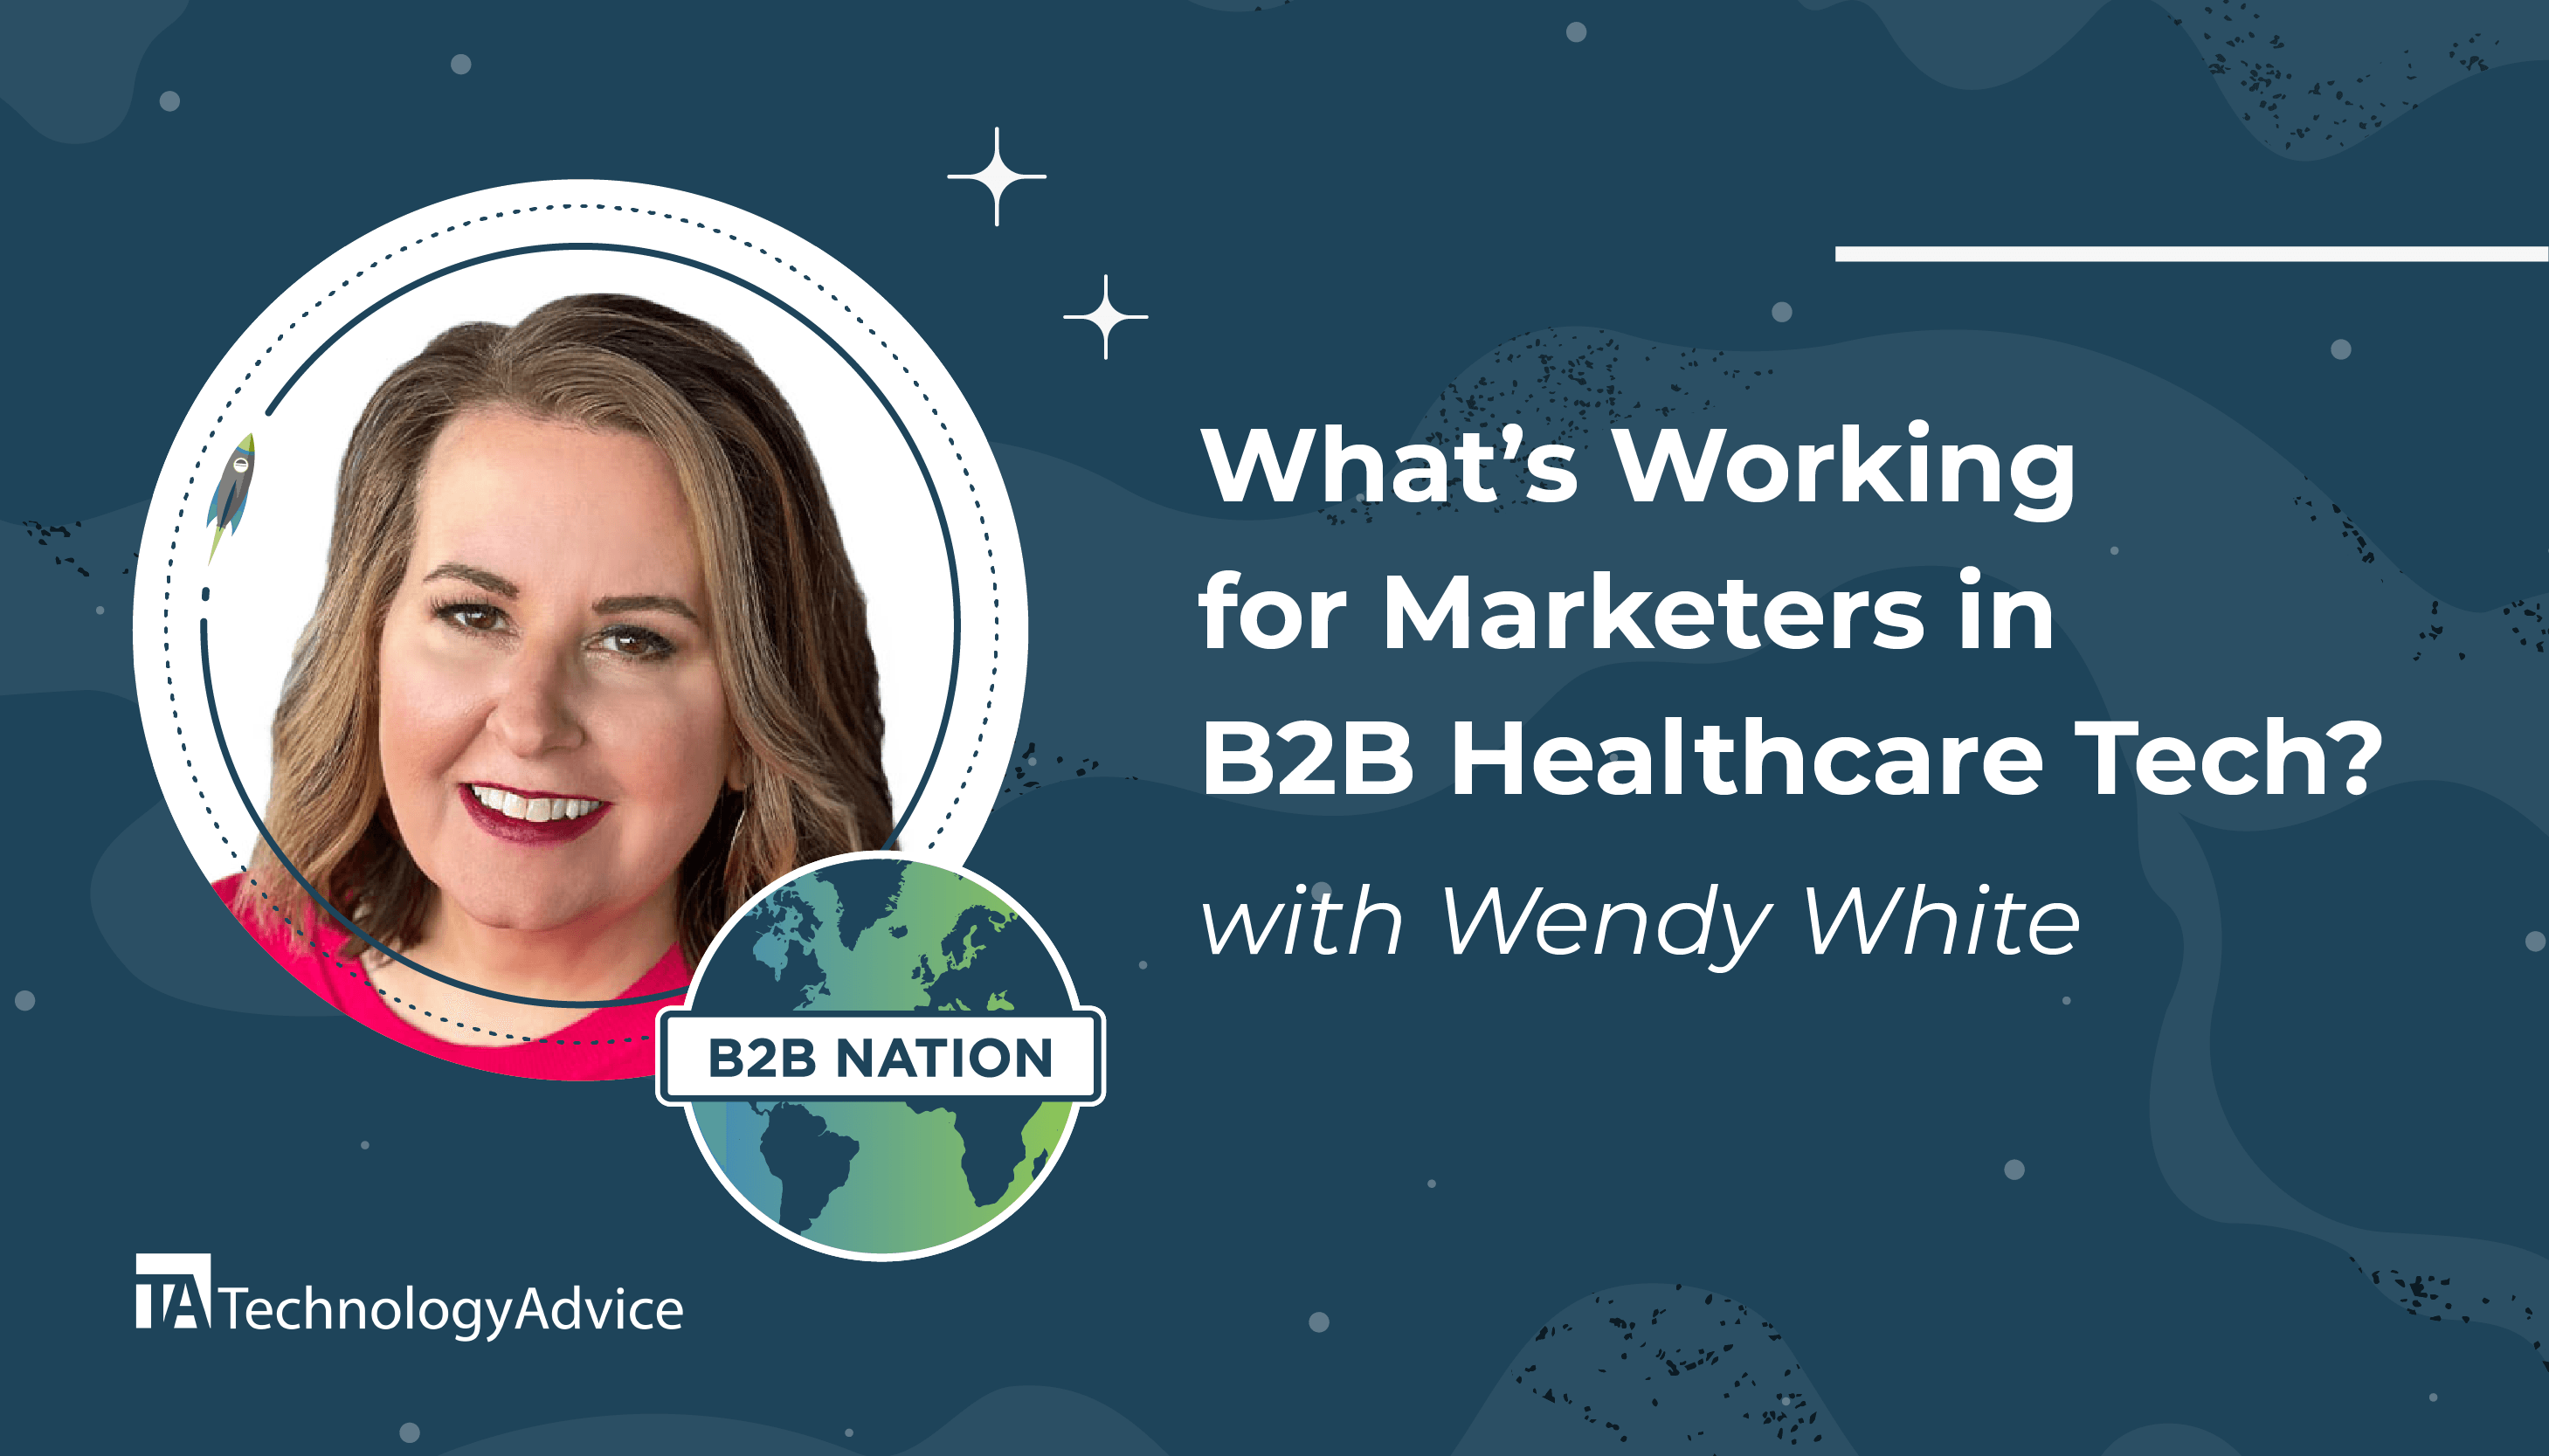 What’s Working for Marketers in B2B Healthcare Tech?